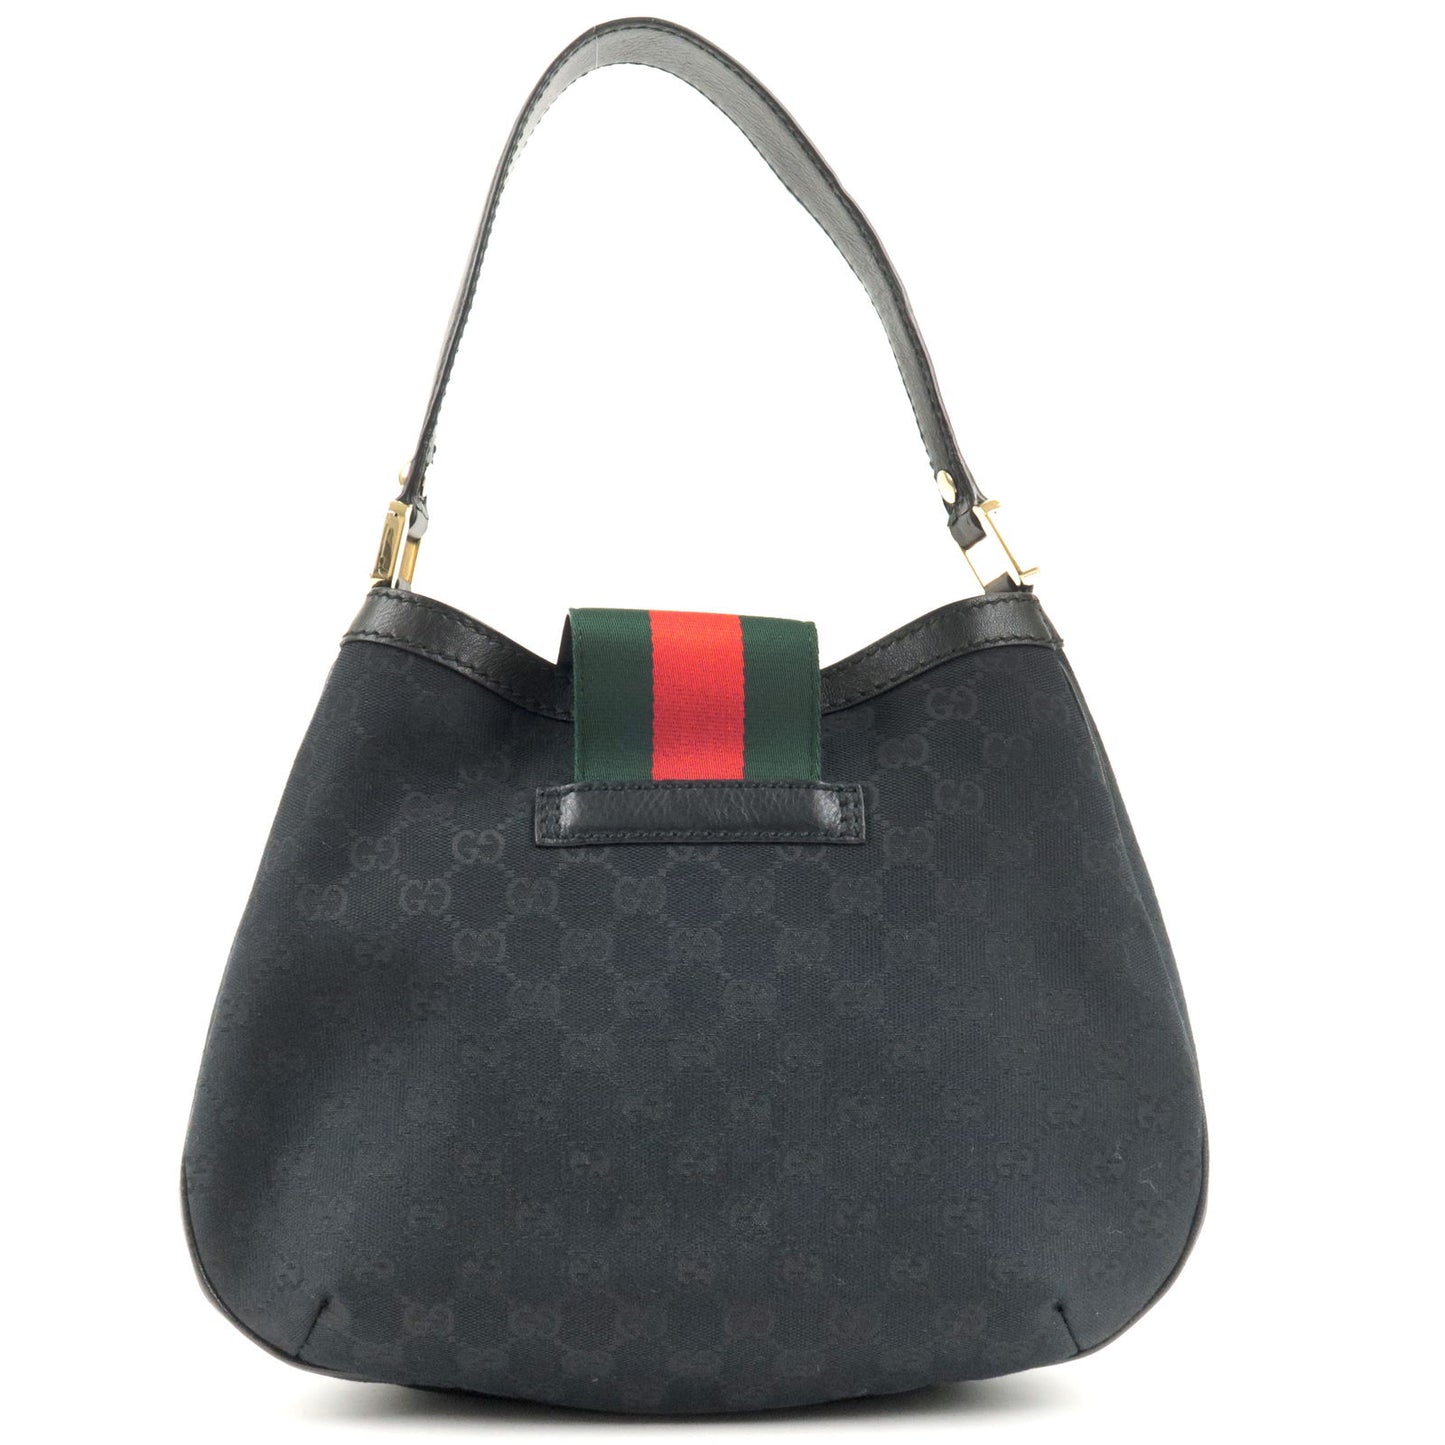 GUCCI Bag, Speedy Model, in Gray Monogram Canvas and Burgundy Patent Leather